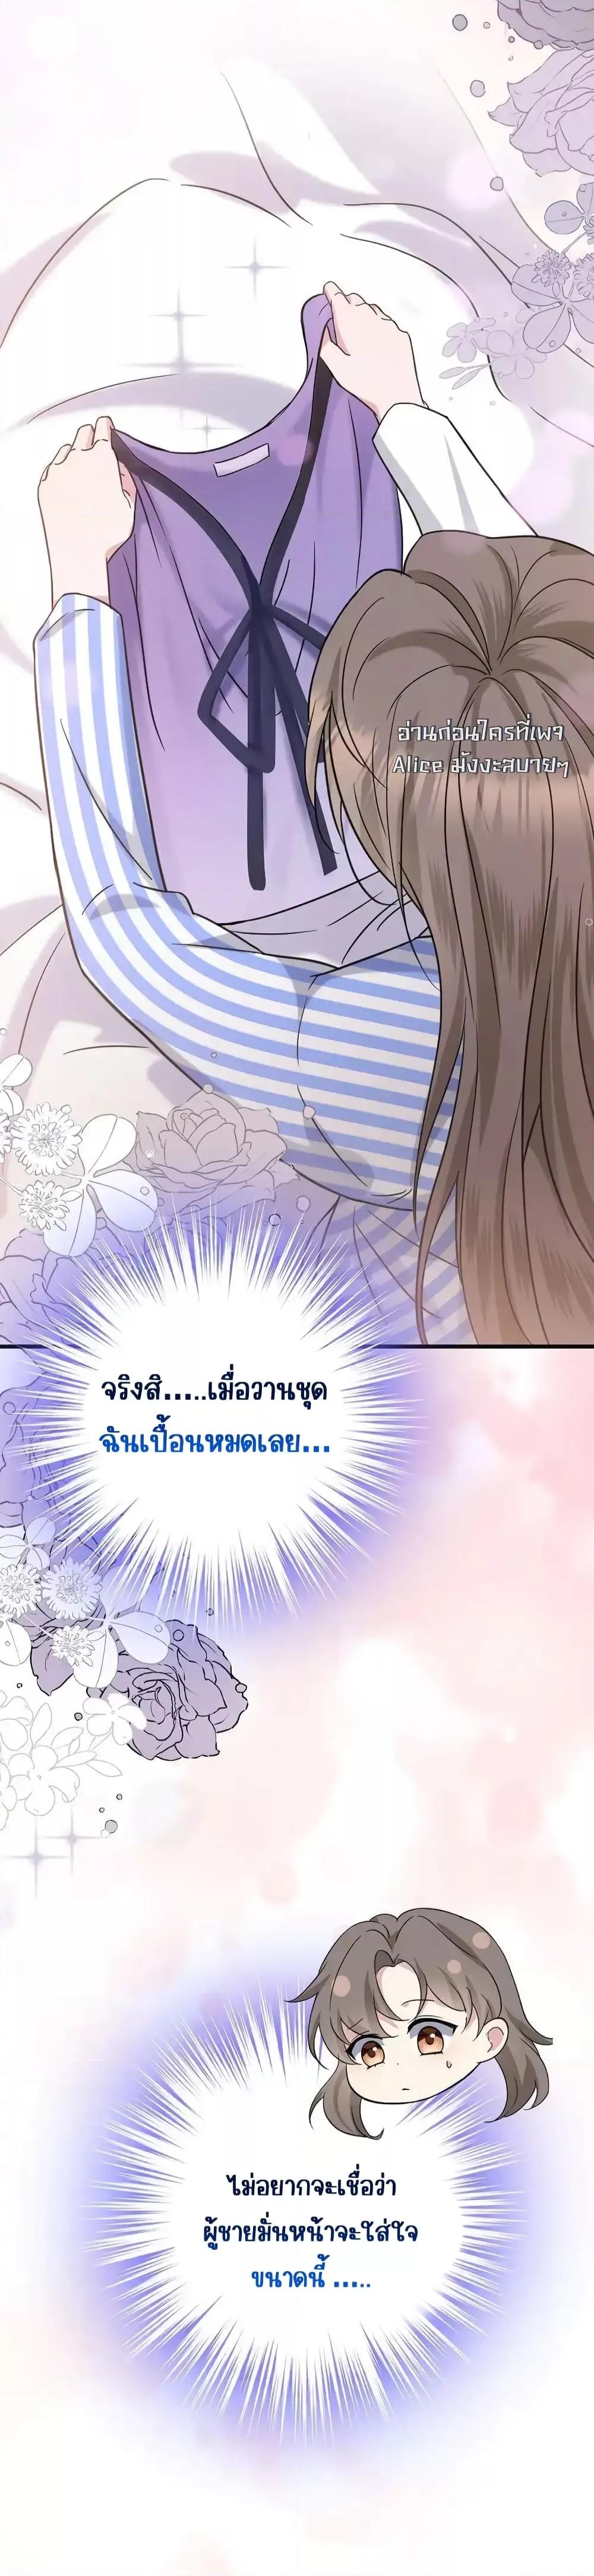 After Breaking Up, I Had Happy With My Ex’s Brother in Law – หลังจากเลิกรา ฉันก็มีความสุขกับคุณพี่เข